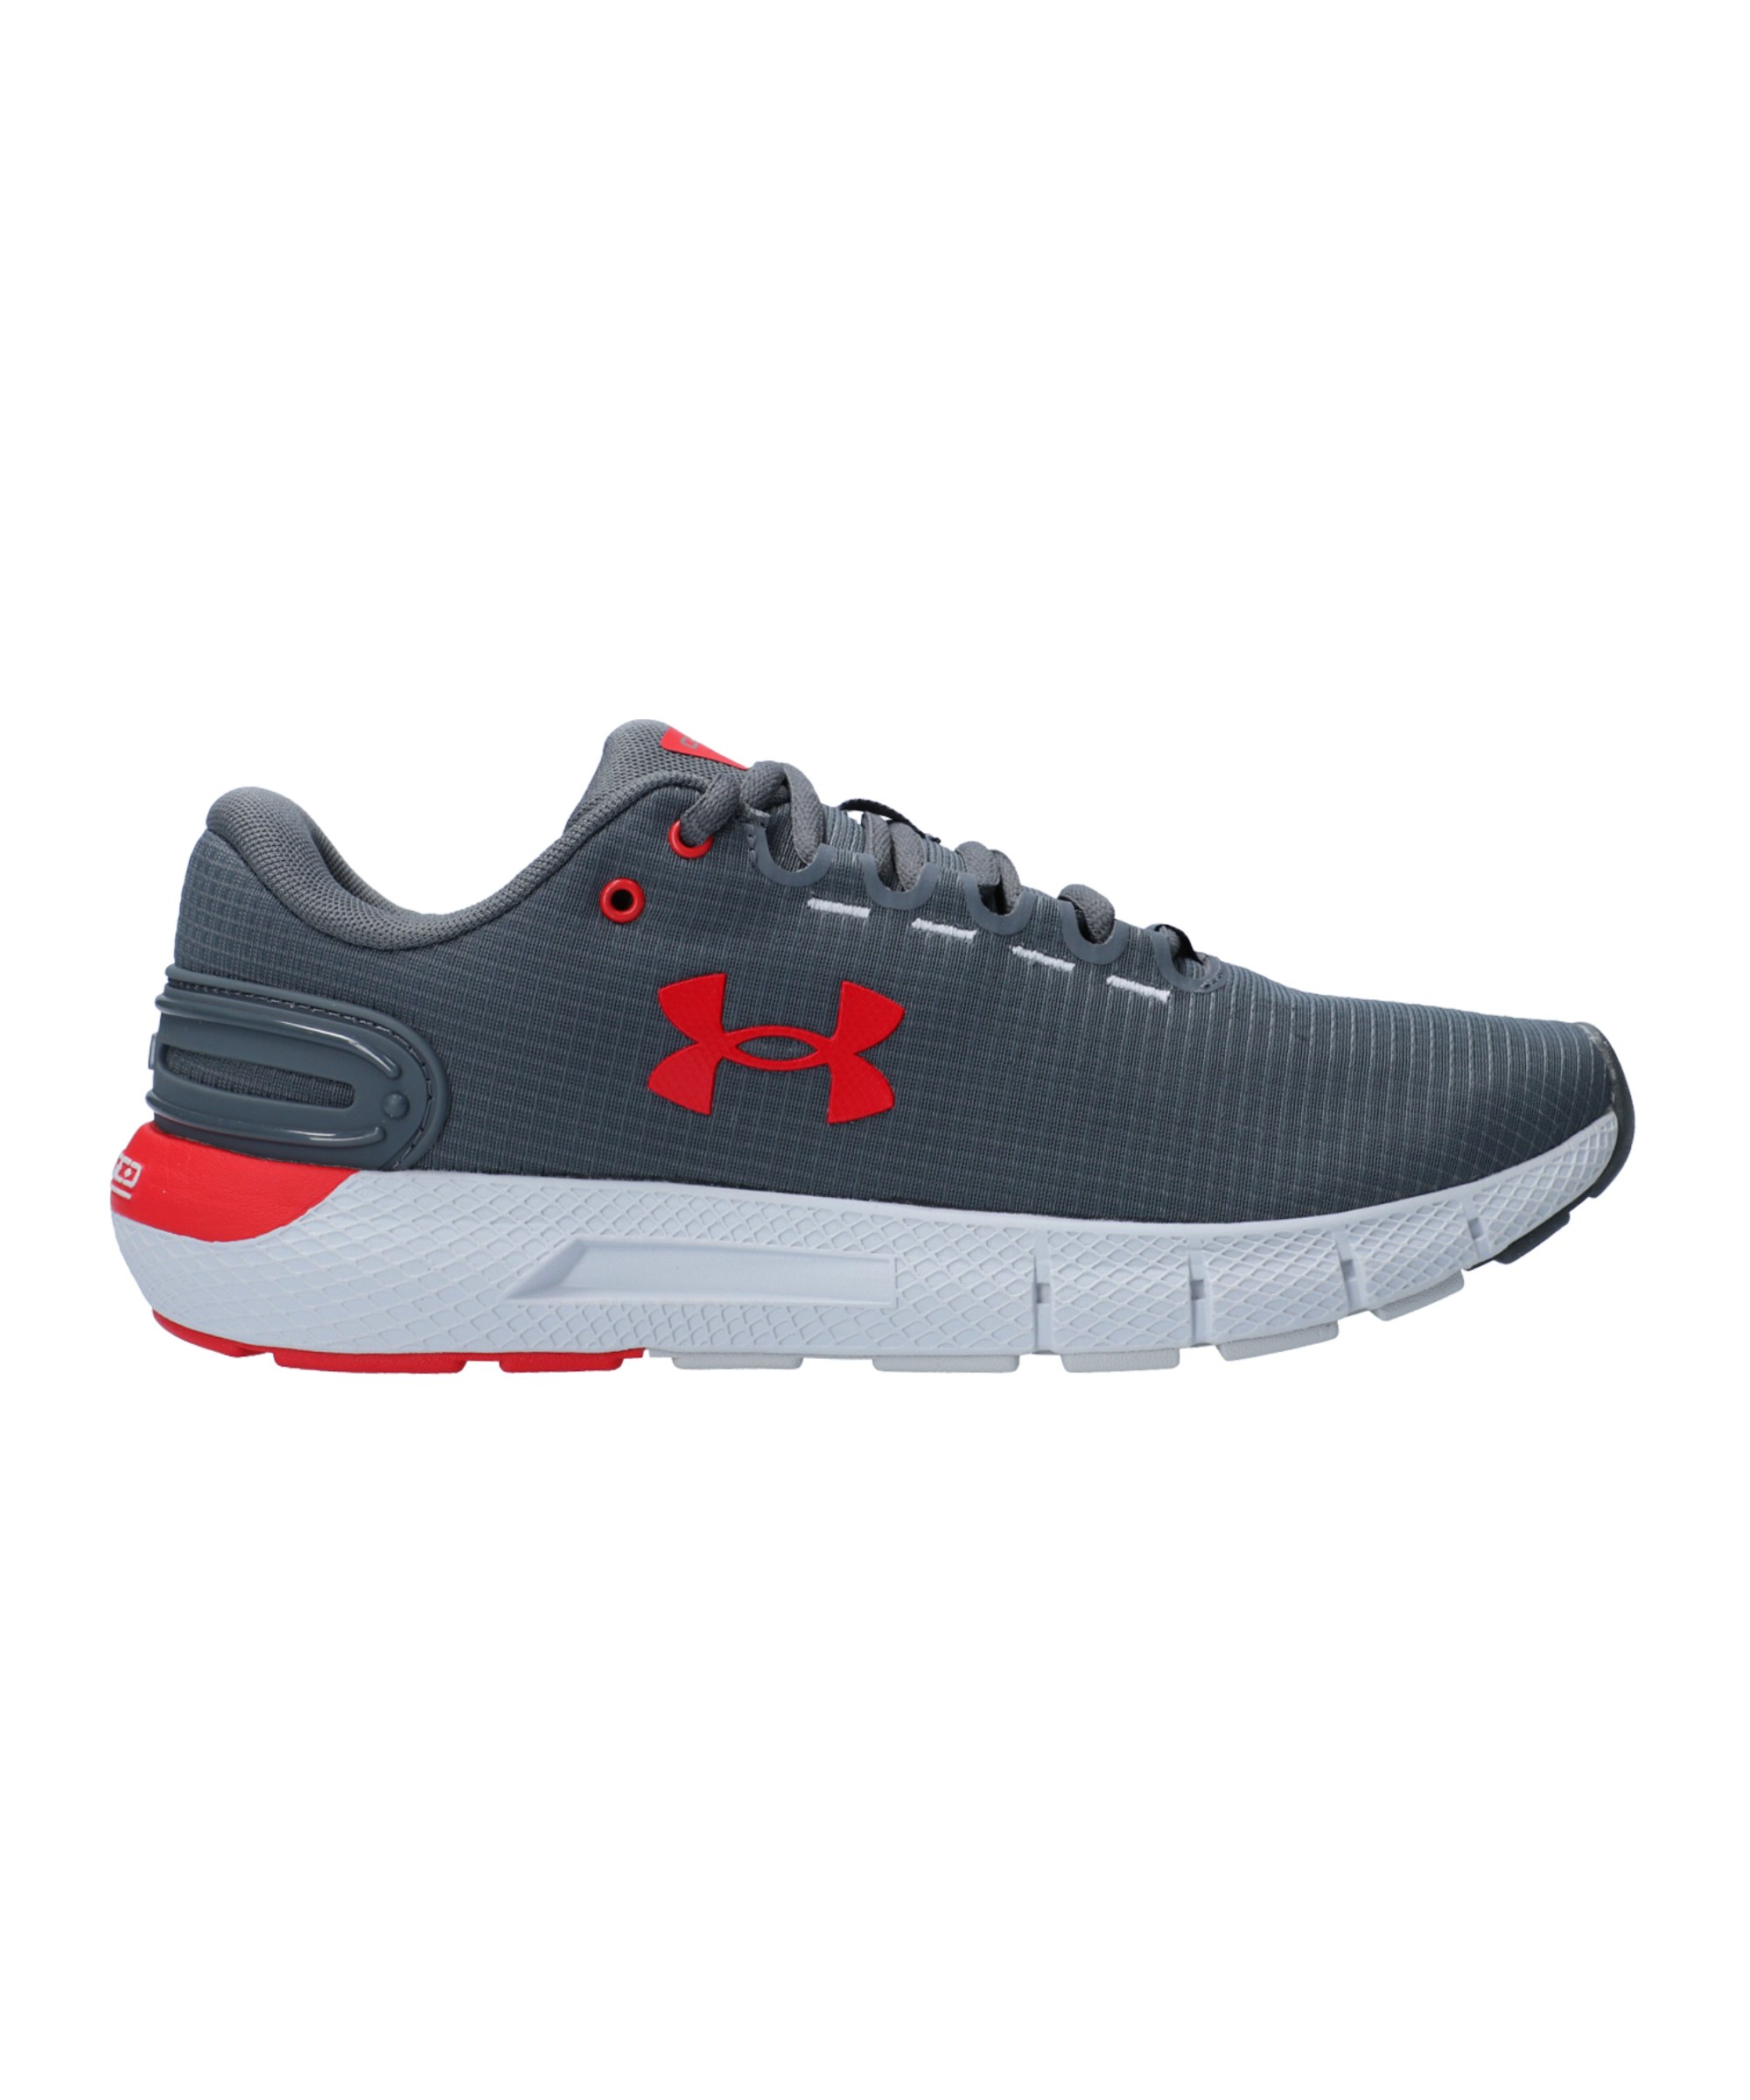 Under Armour Charged Rogue 2.5 Storm Running F100 - grau